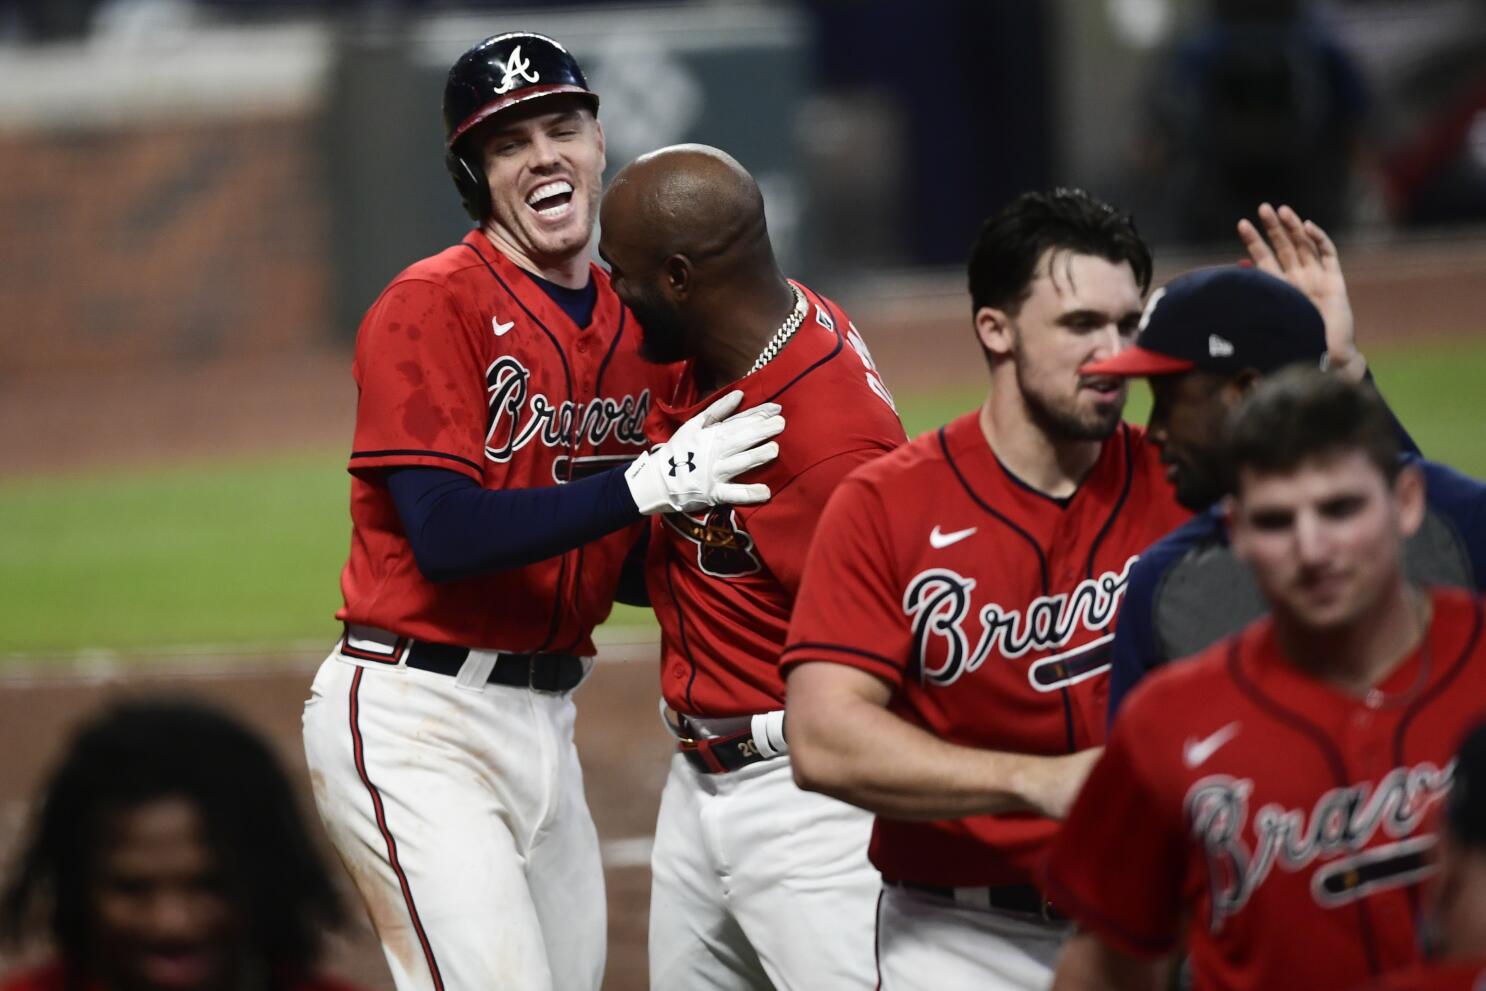 He deserved every second of it' - Inside Freddie Freeman's